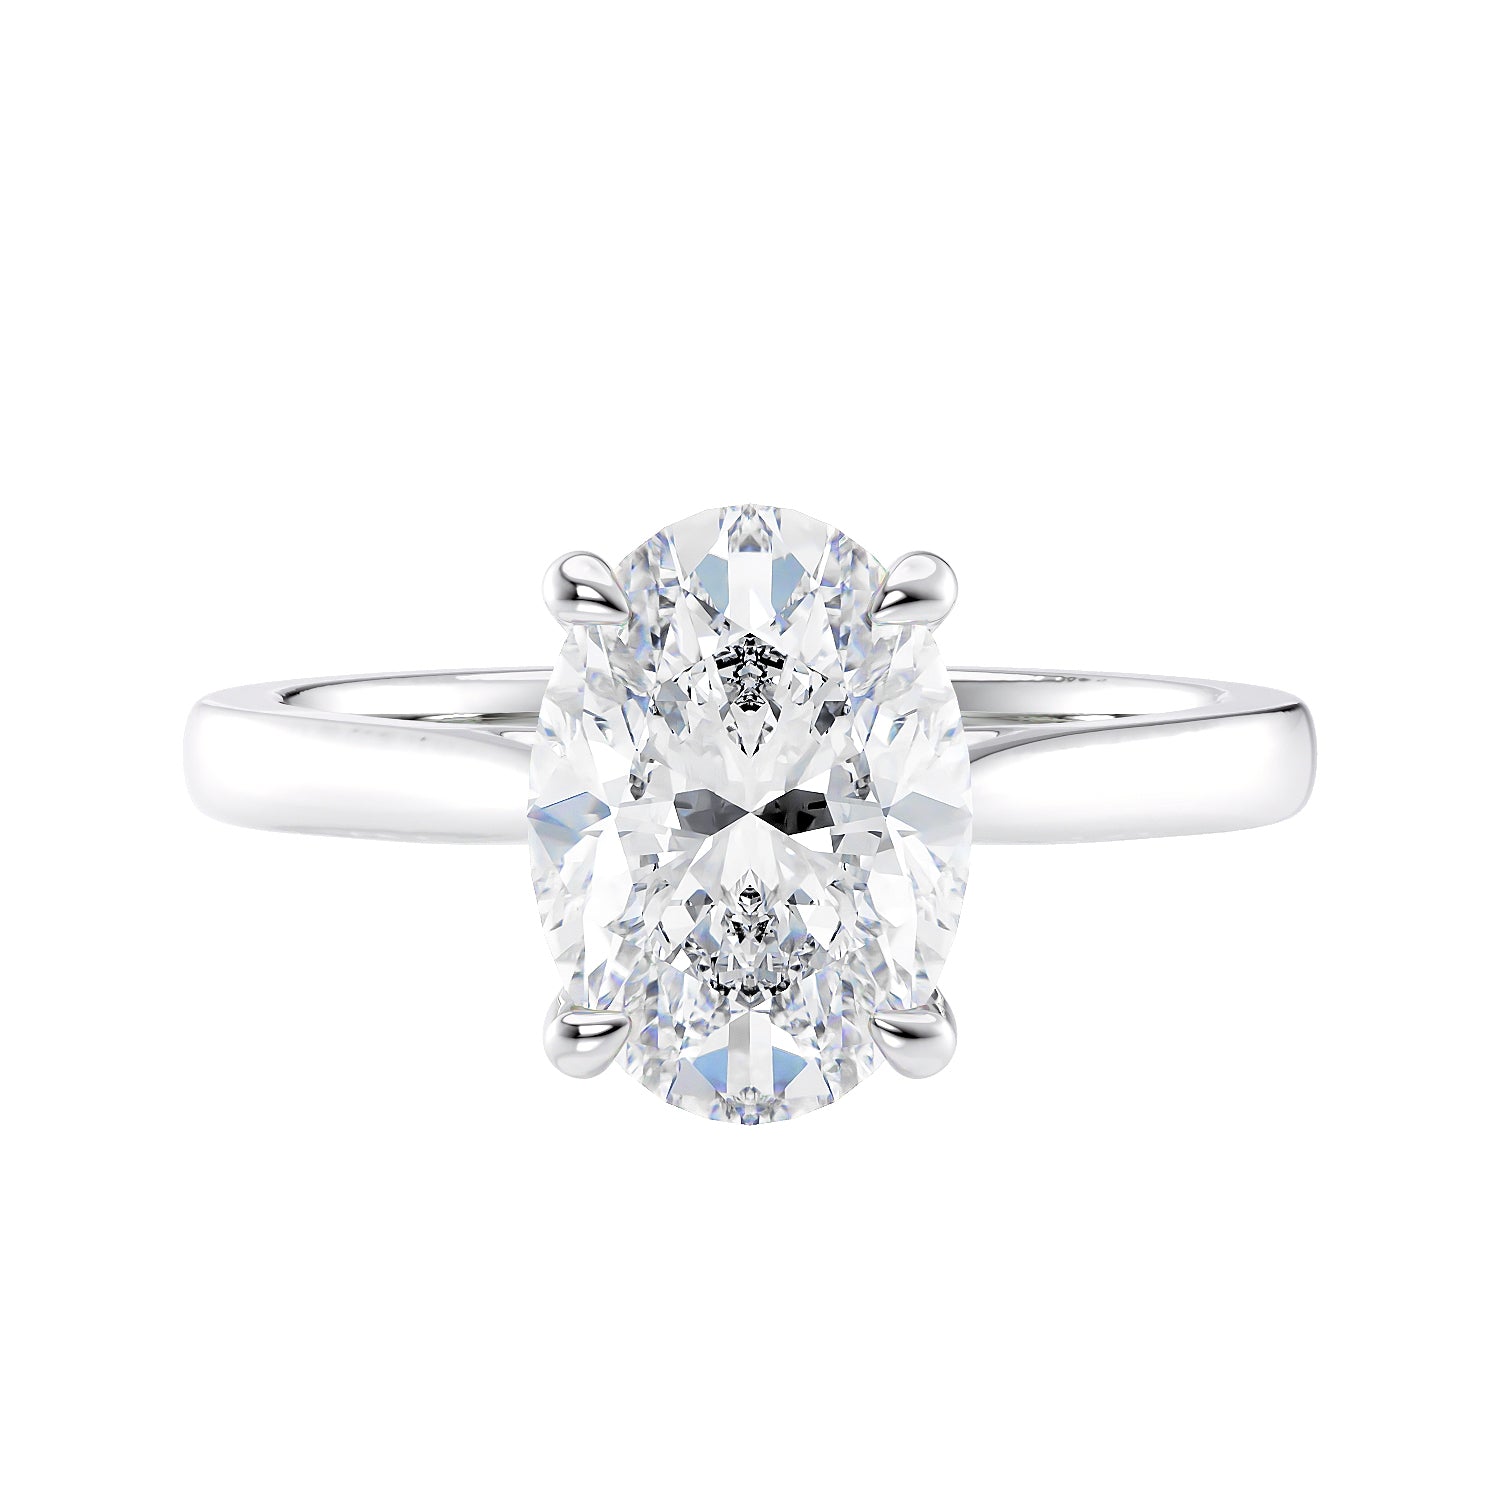 Oval solitaire lab grown diamond engagement ring white gold front view.